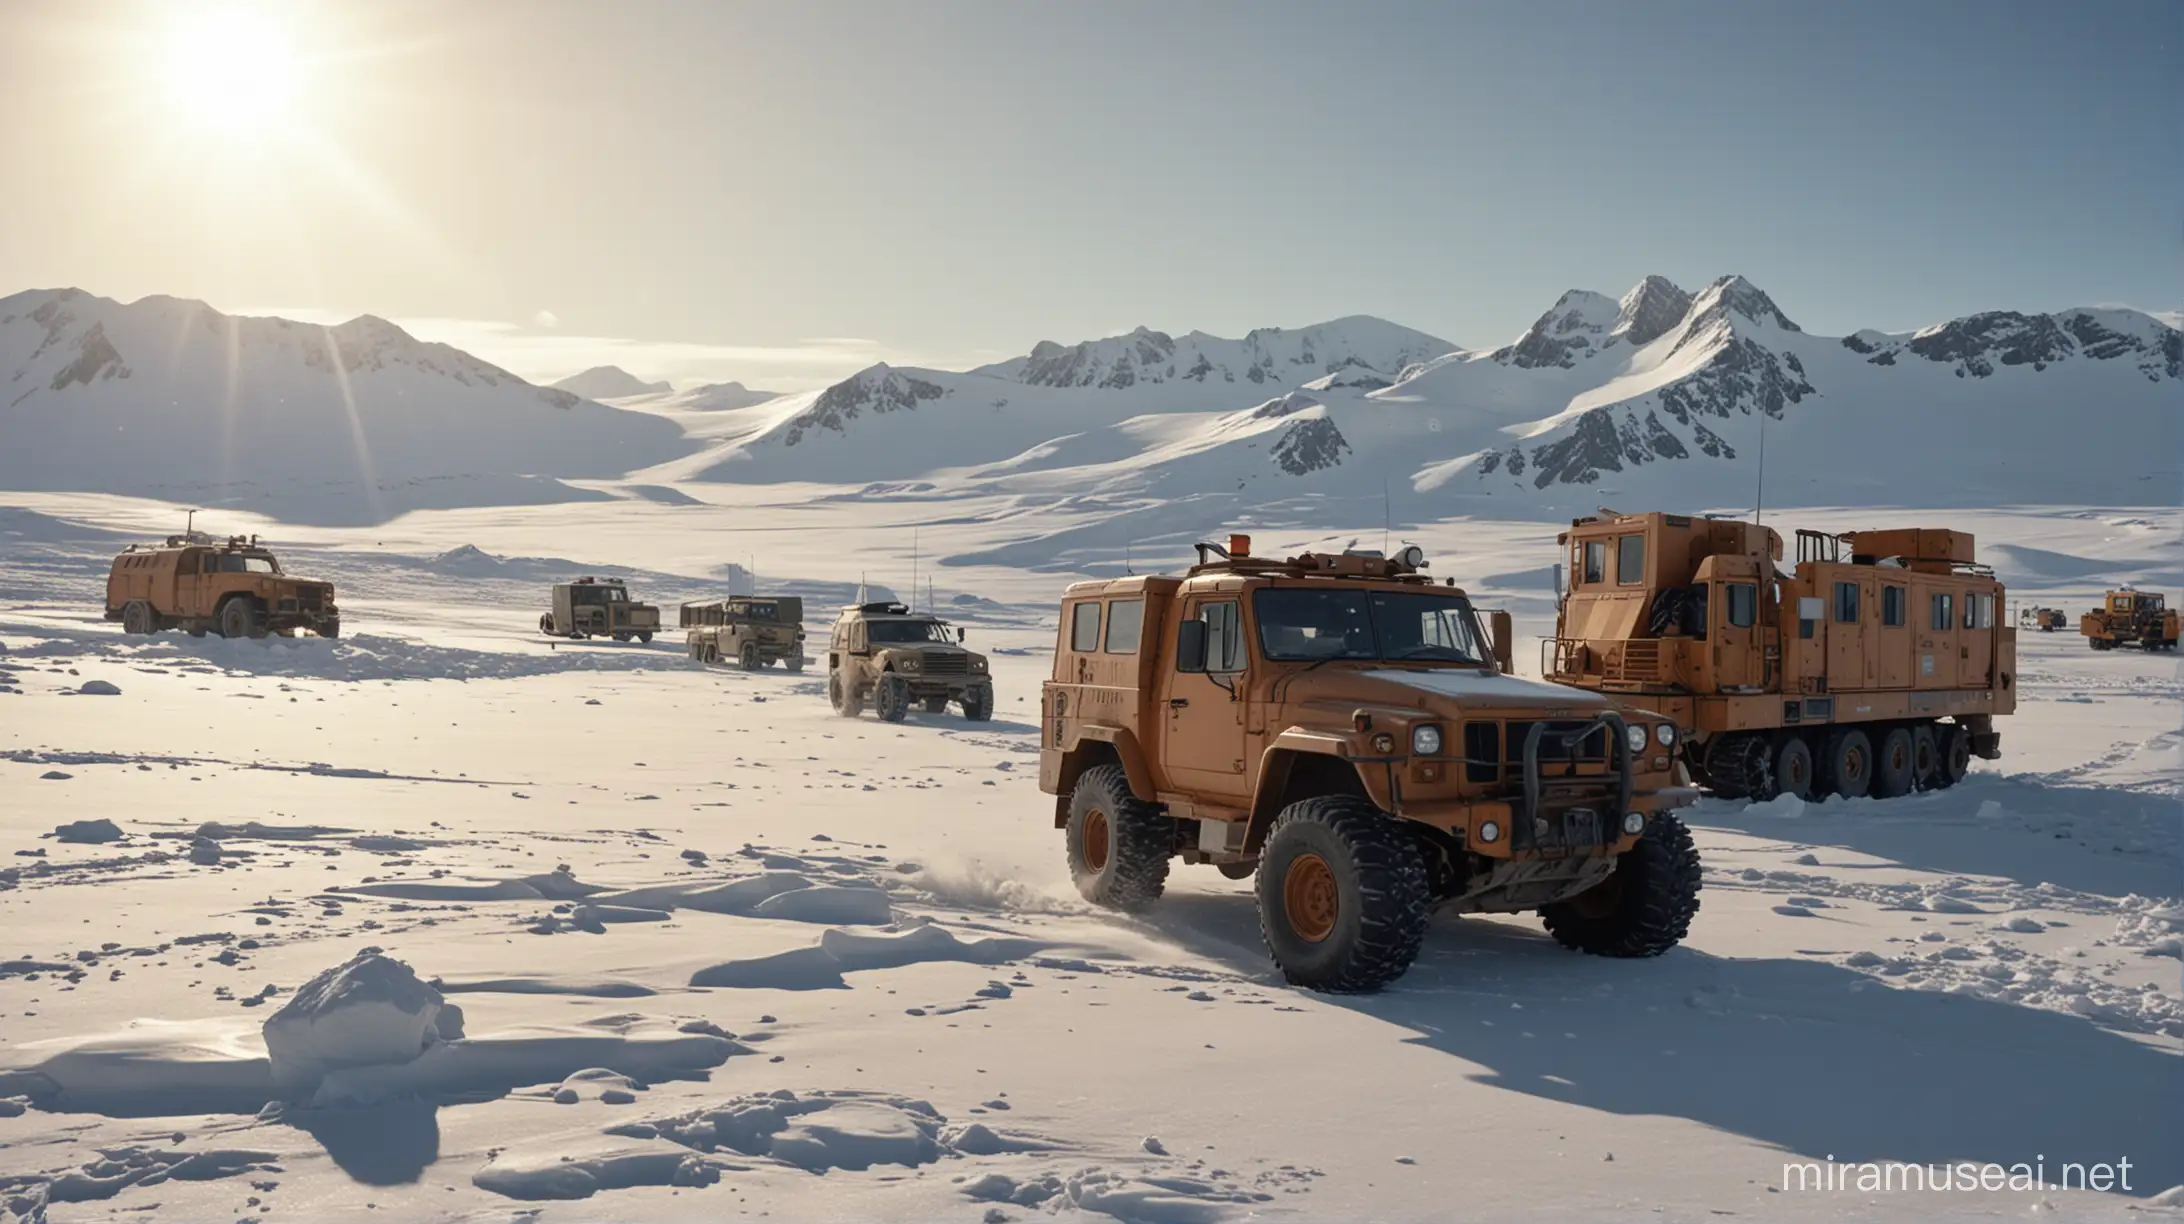 Cinematic Still The Thing Film Scene with Snowcat Convoy in Antarctic Setting